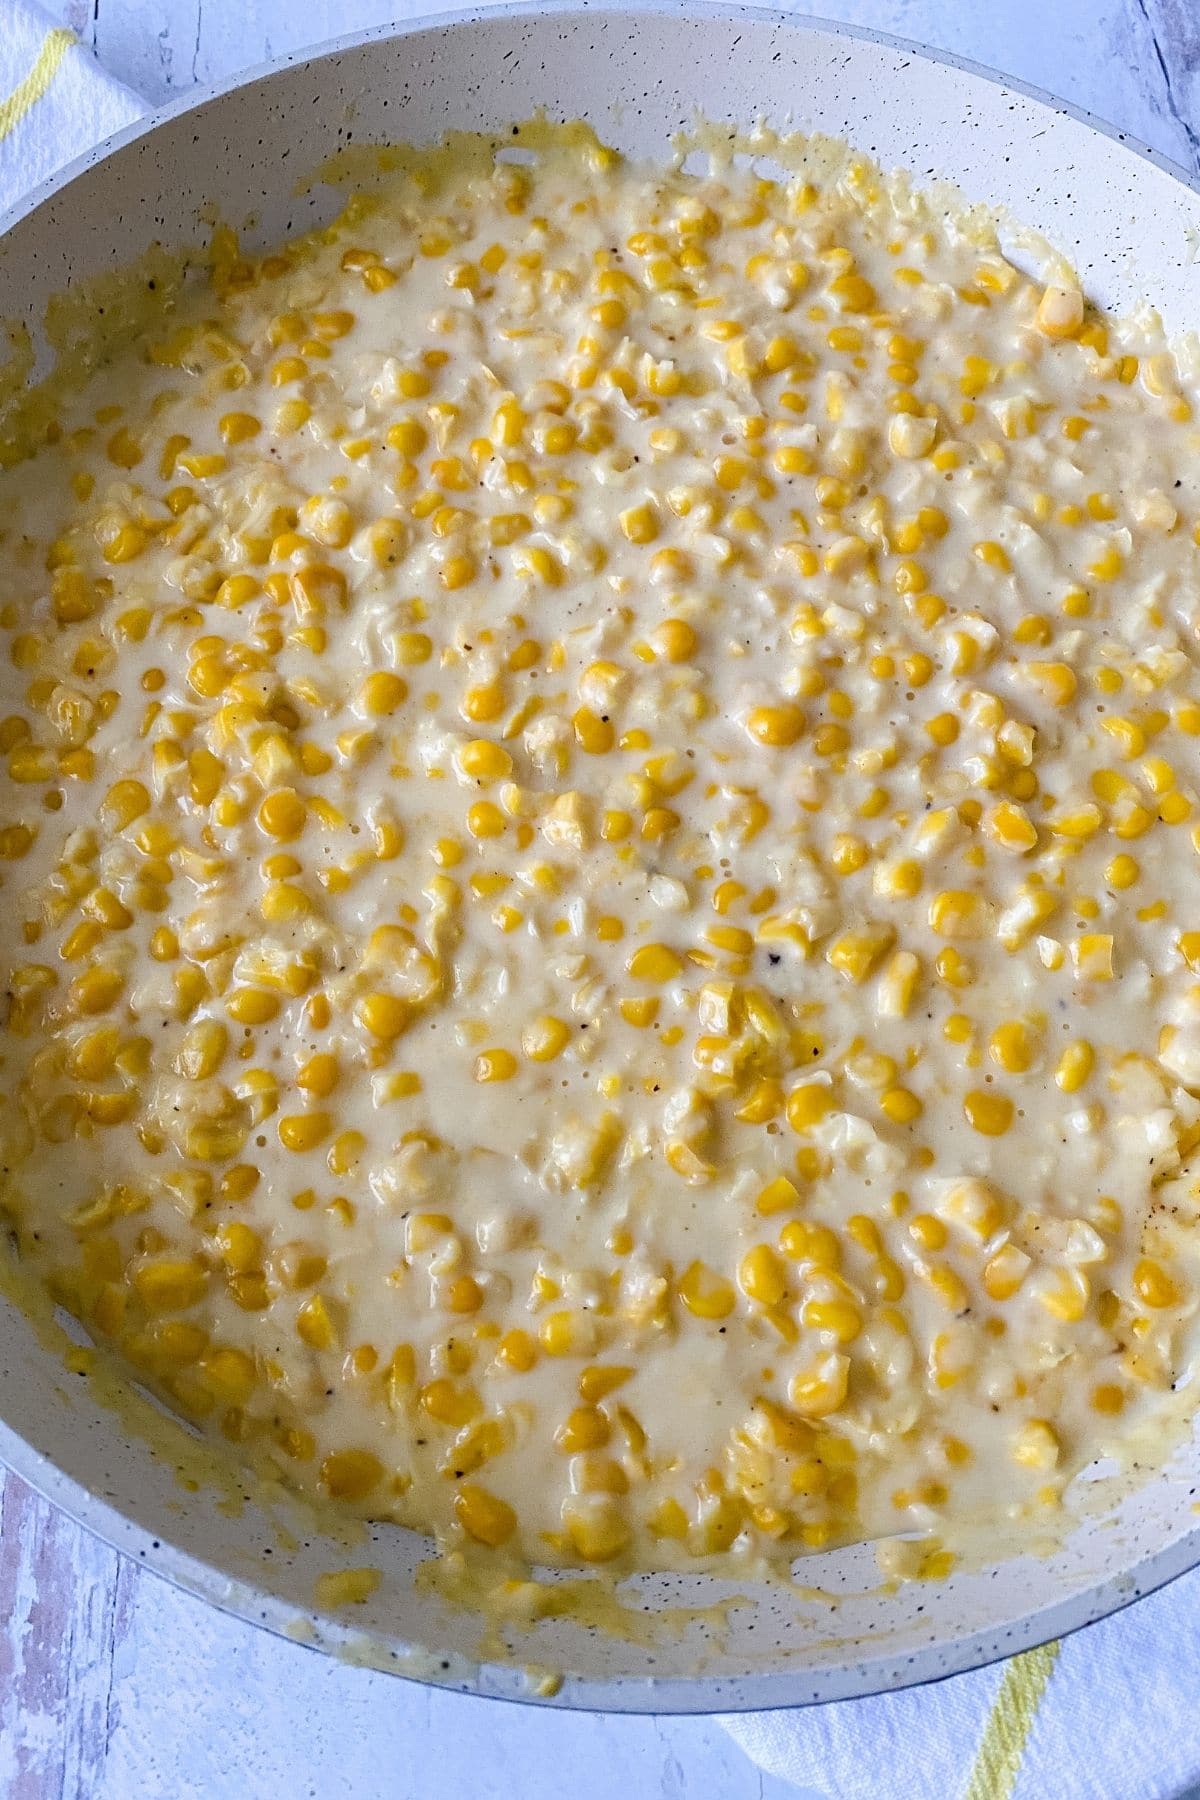 Skillet of creamed corn on table